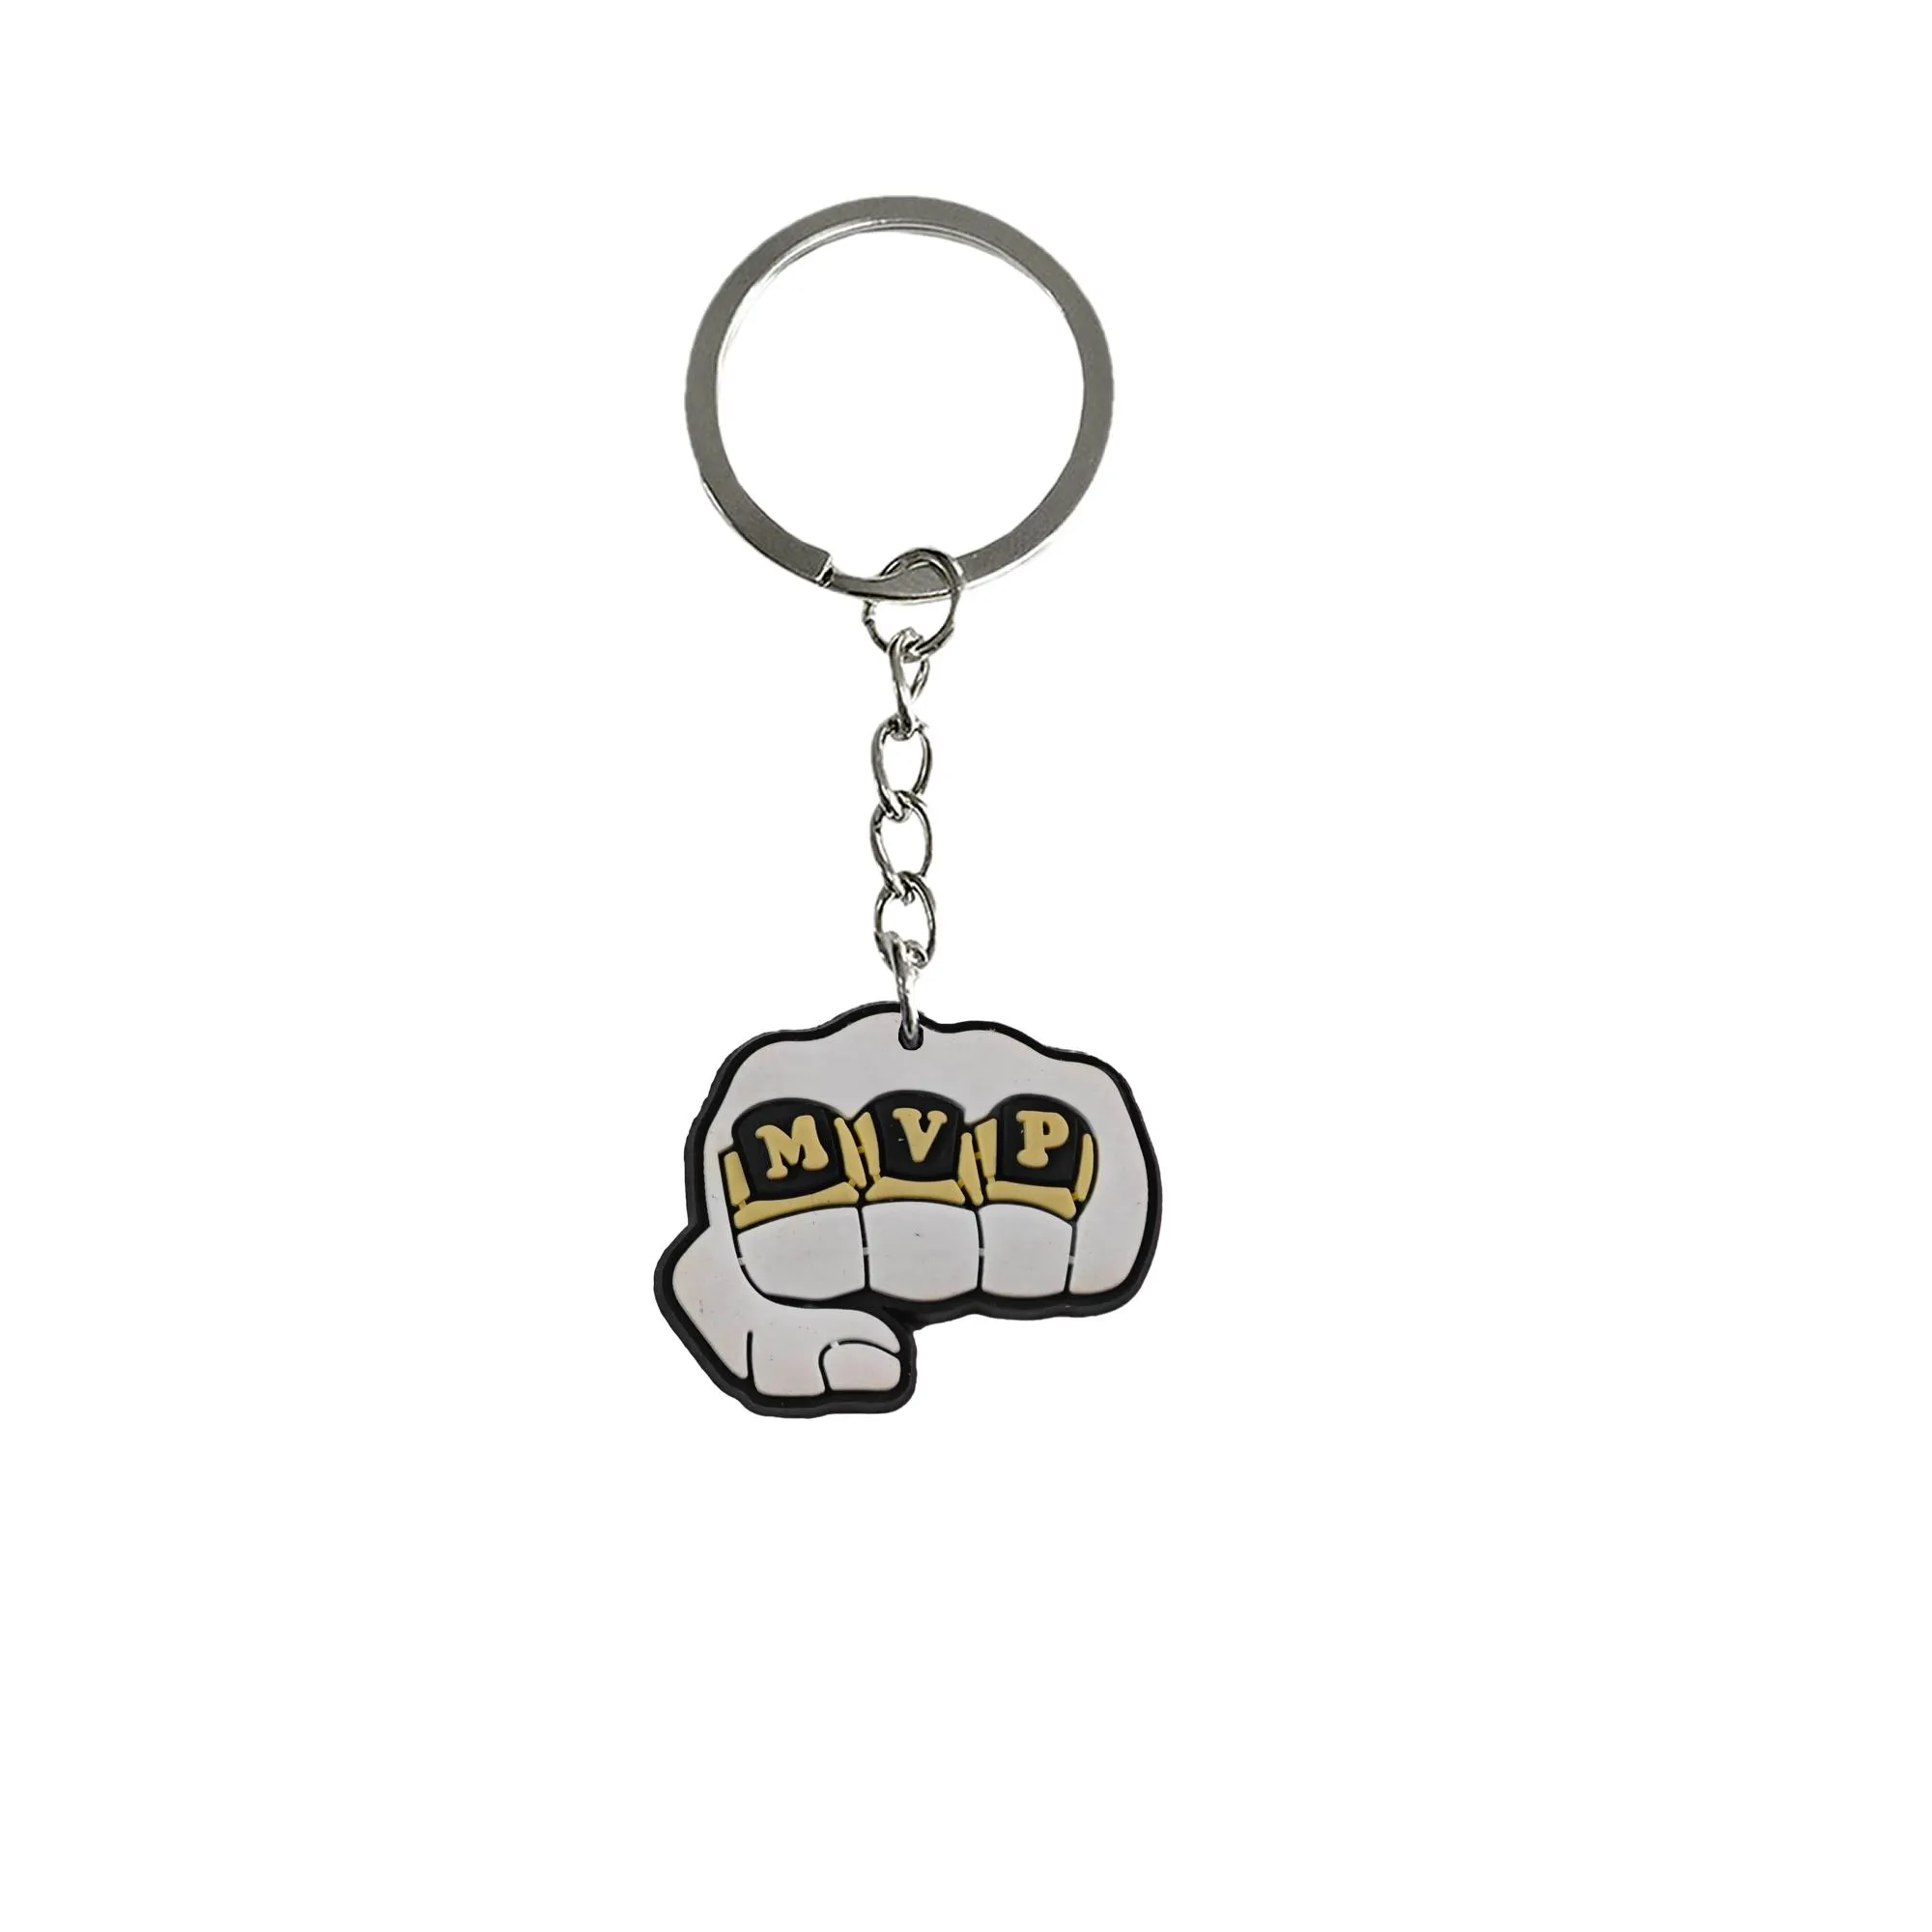 basketball keychain for goodie bag stuffers supplies keychains key ring men keyring suitable schoolbag anime cool backpacks backpack shoulder pendant accessories charm party favors